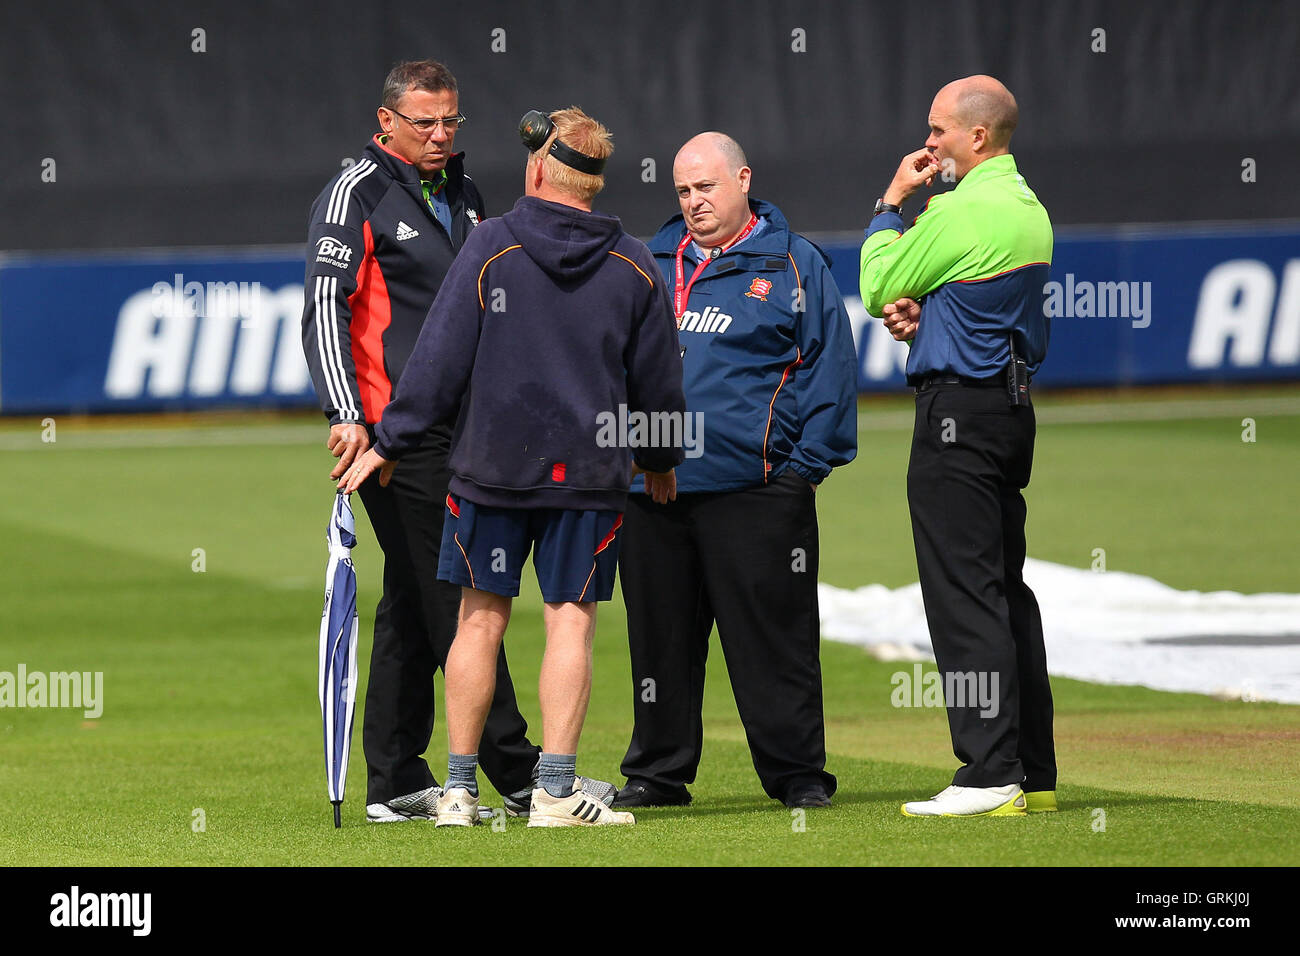 Umpires David Millns (L) and Mike Burns (R) in conversation with ground staff about the prospects of play - Essex Eagles vs Sri Lanka - 50-over Tour Match at the Essex County Ground, Chelmsford - 13/05/14 Stock Photo